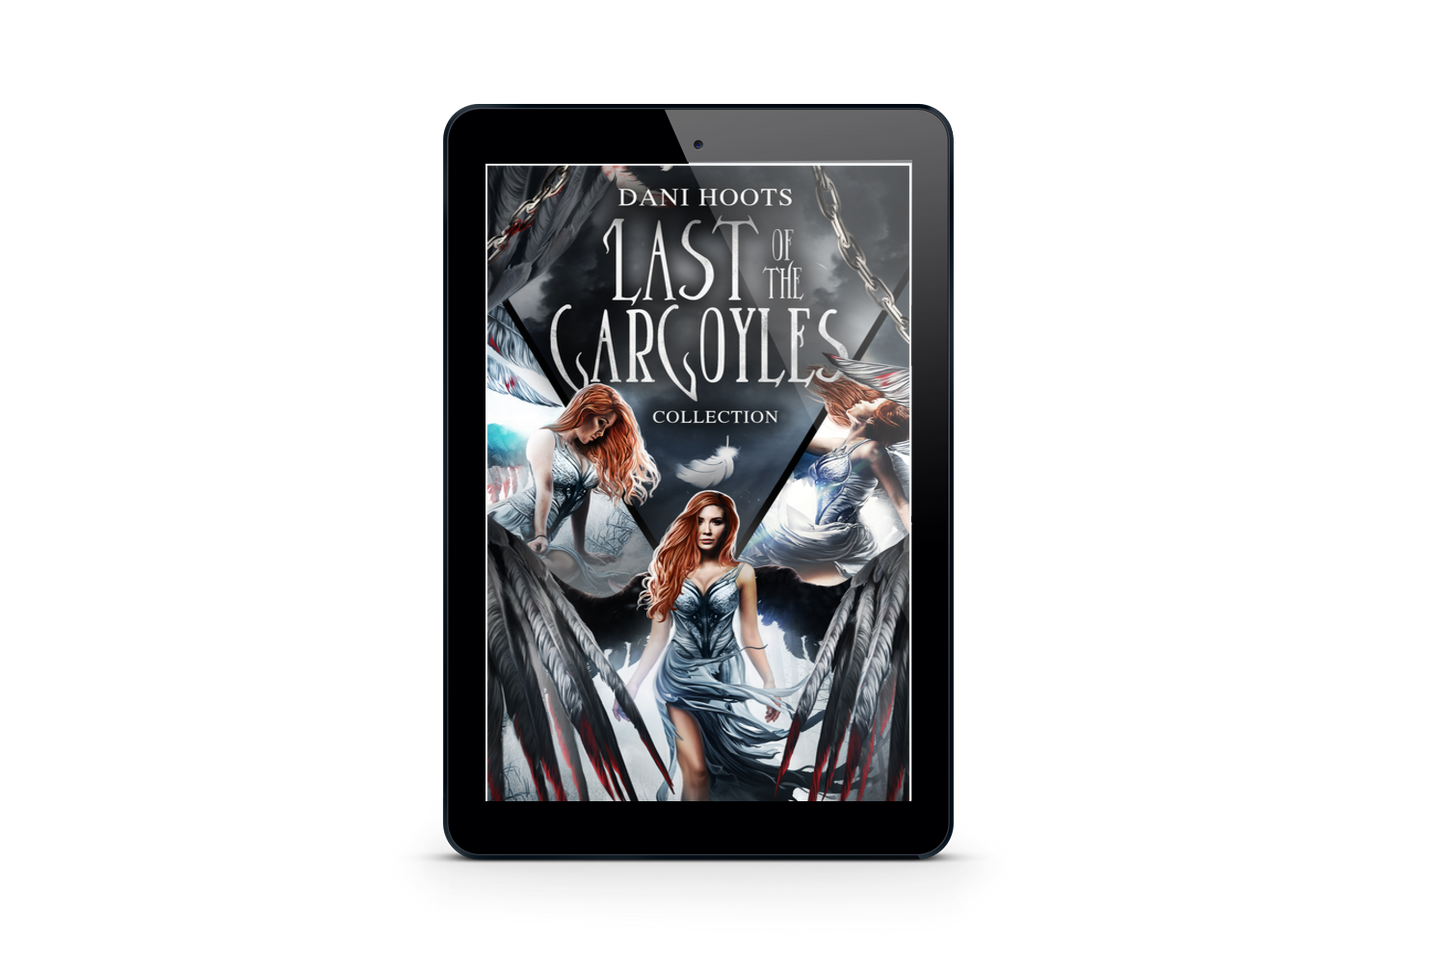 Last of the Gargoyles — The Complete Trilogy eBook